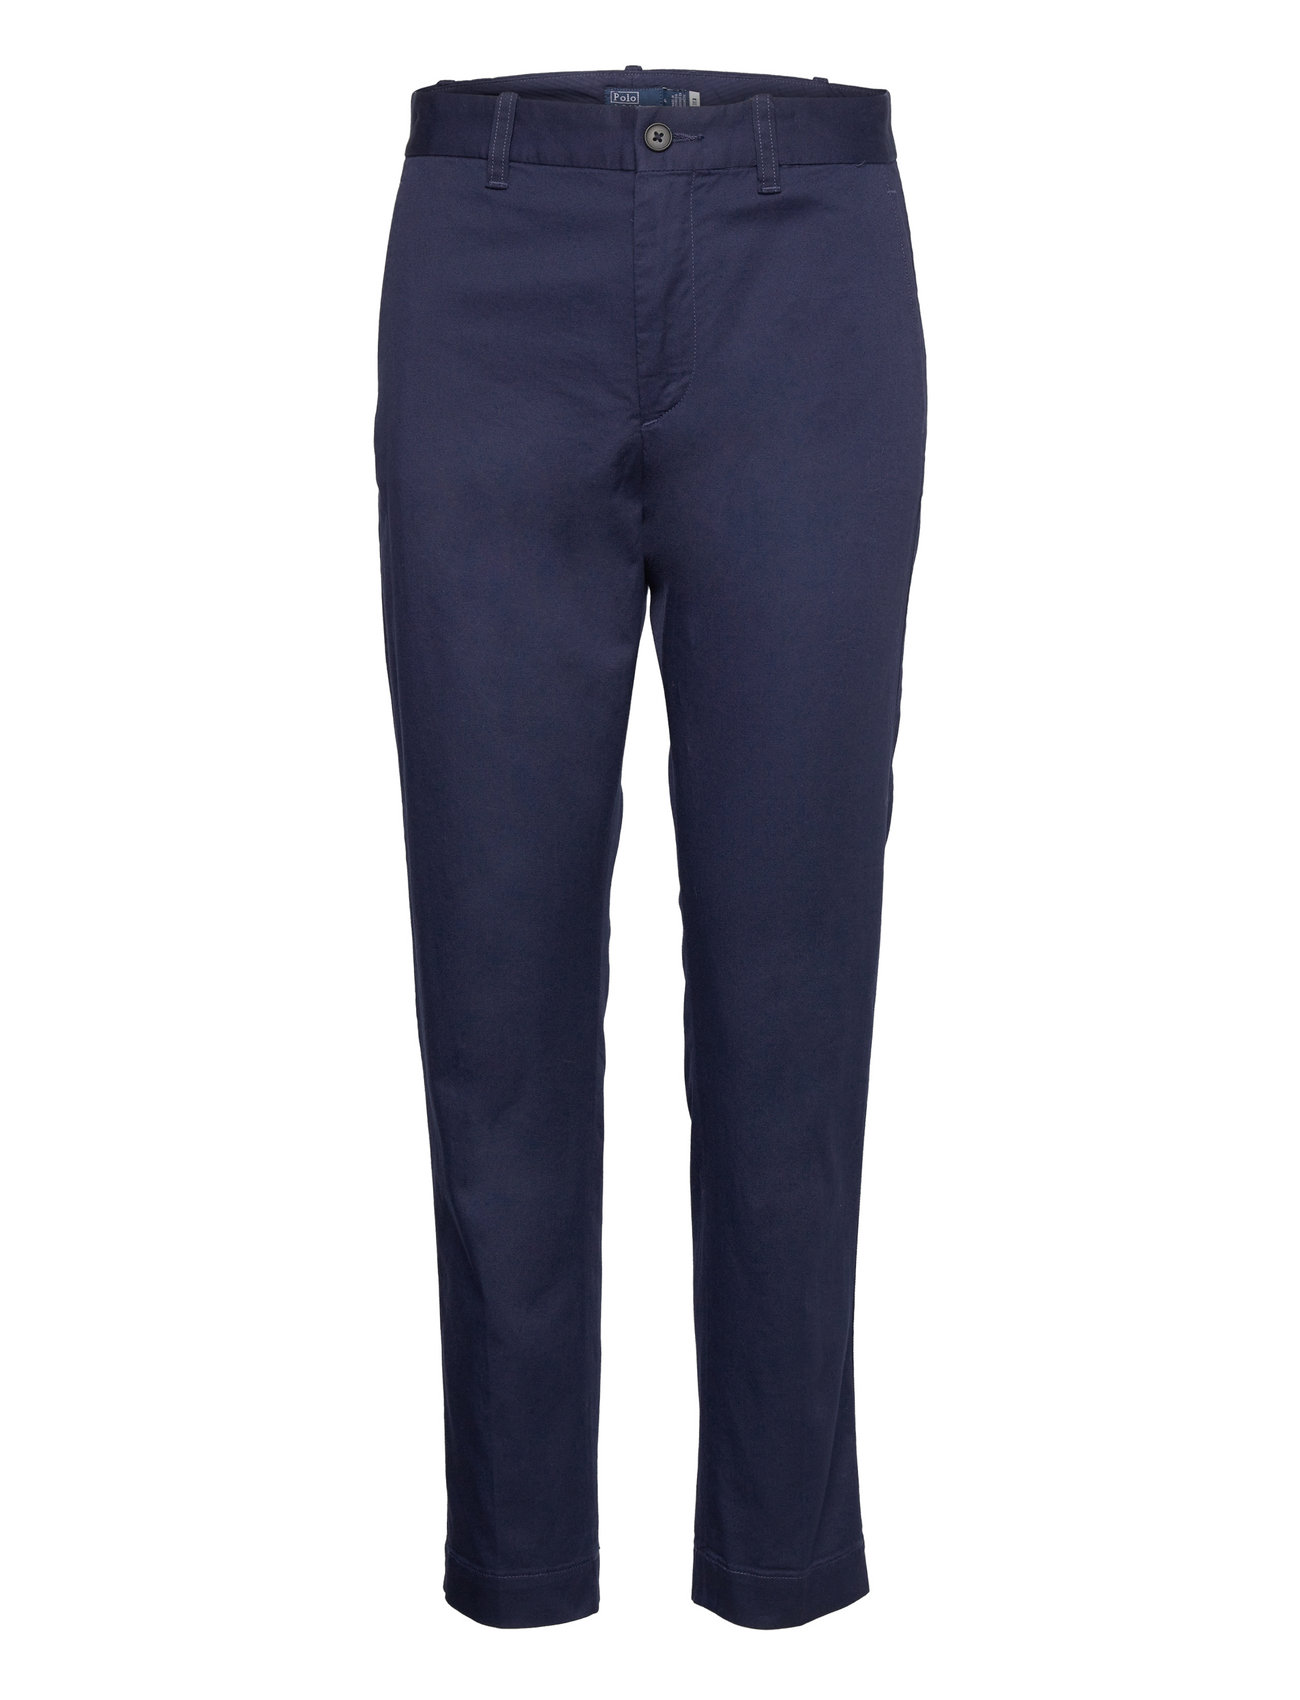 Cropped Slim Fit Twill Chino Pant Bottoms Trousers Chinos Navy Polo Ralph Lauren